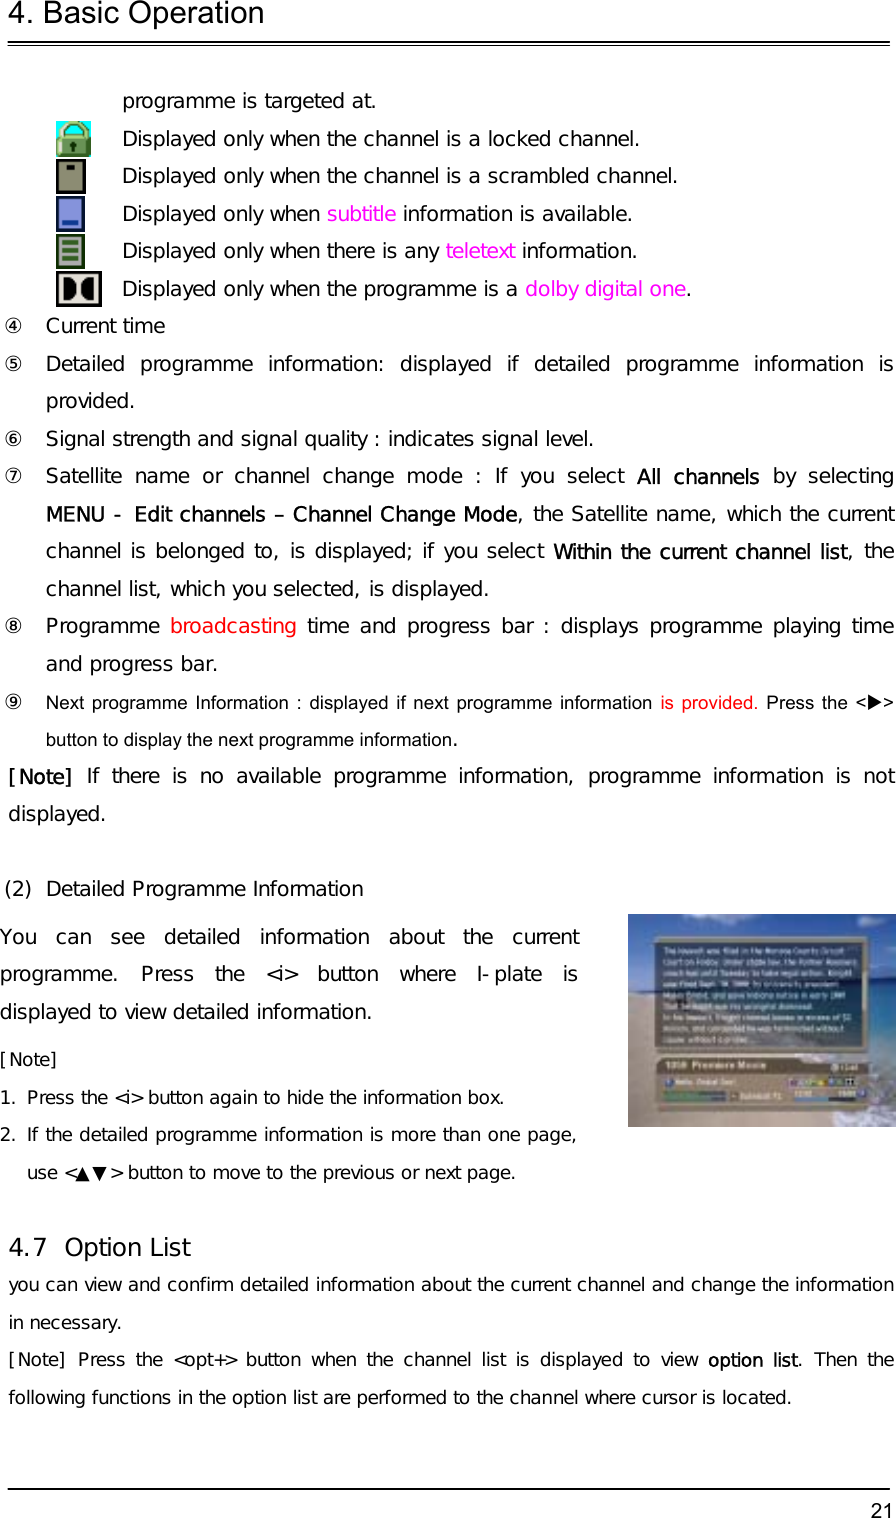 4. Basic Operation  21programme is targeted at.  Displayed only when the channel is a locked channel.  Displayed only when the channel is a scrambled channel.  Displayed only when subtitle information is available.  Displayed only when there is any teletext information.  Displayed only when the programme is a dolby digital one. ④ Current time ⑤  Detailed programme information: displayed if detailed programme information is provided. ⑥  Signal strength and signal quality : indicates signal level. ⑦  Satellite name or channel change mode : If you select All channels by selecting  MENU - Edit channels – Channel Change Mode, the Satellite name, which the current channel is belonged to, is displayed; if you select Within the current channel list, the channel list, which you selected, is displayed.  ⑧ Programme broadcasting time and progress bar : displays programme playing time and progress bar. ⑨  Next programme Information : displayed if next programme information is provided. Press the &lt;X&gt; button to display the next programme information. [Note]  If there is no available programme information, programme information is not displayed.  (2)  Detailed Programme Information You can see detailed information about the current programme. Press the &lt;i&gt; button where I-plate is displayed to view detailed information. [Note]  1. Press the &lt;i&gt; button again to hide the information box. 2. If the detailed programme information is more than one page, use &lt;▲▼&gt; button to move to the previous or next page.  4.7 Option List you can view and confirm detailed information about the current channel and change the information in necessary. [Note] Press the &lt;opt+&gt; button when the channel list is displayed to view option list. Then the following functions in the option list are performed to the channel where cursor is located.  